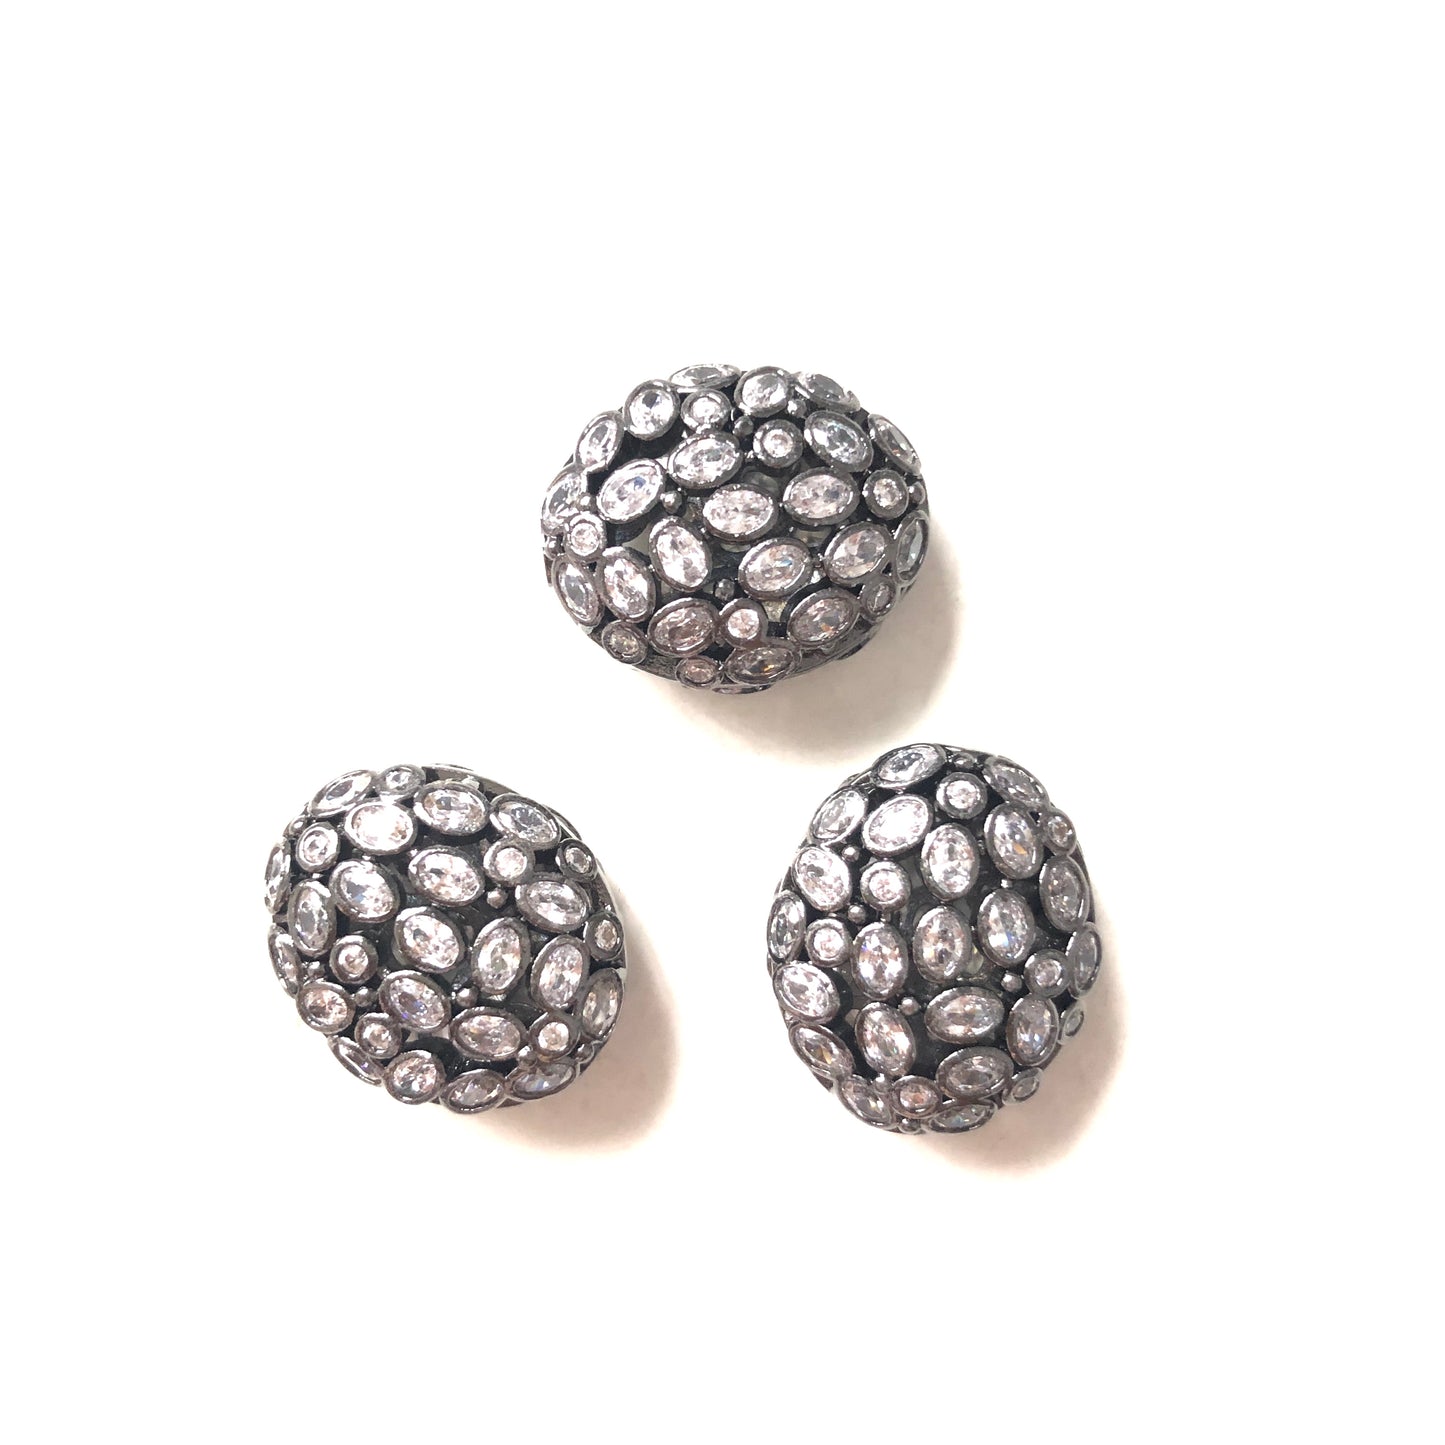 5-10pcs/lot 19*16mm Small Size Hollow Flat Oval CZ Egg Beads Spacers Black CZ Paved Spacers Egg Beads Charms Beads Beyond